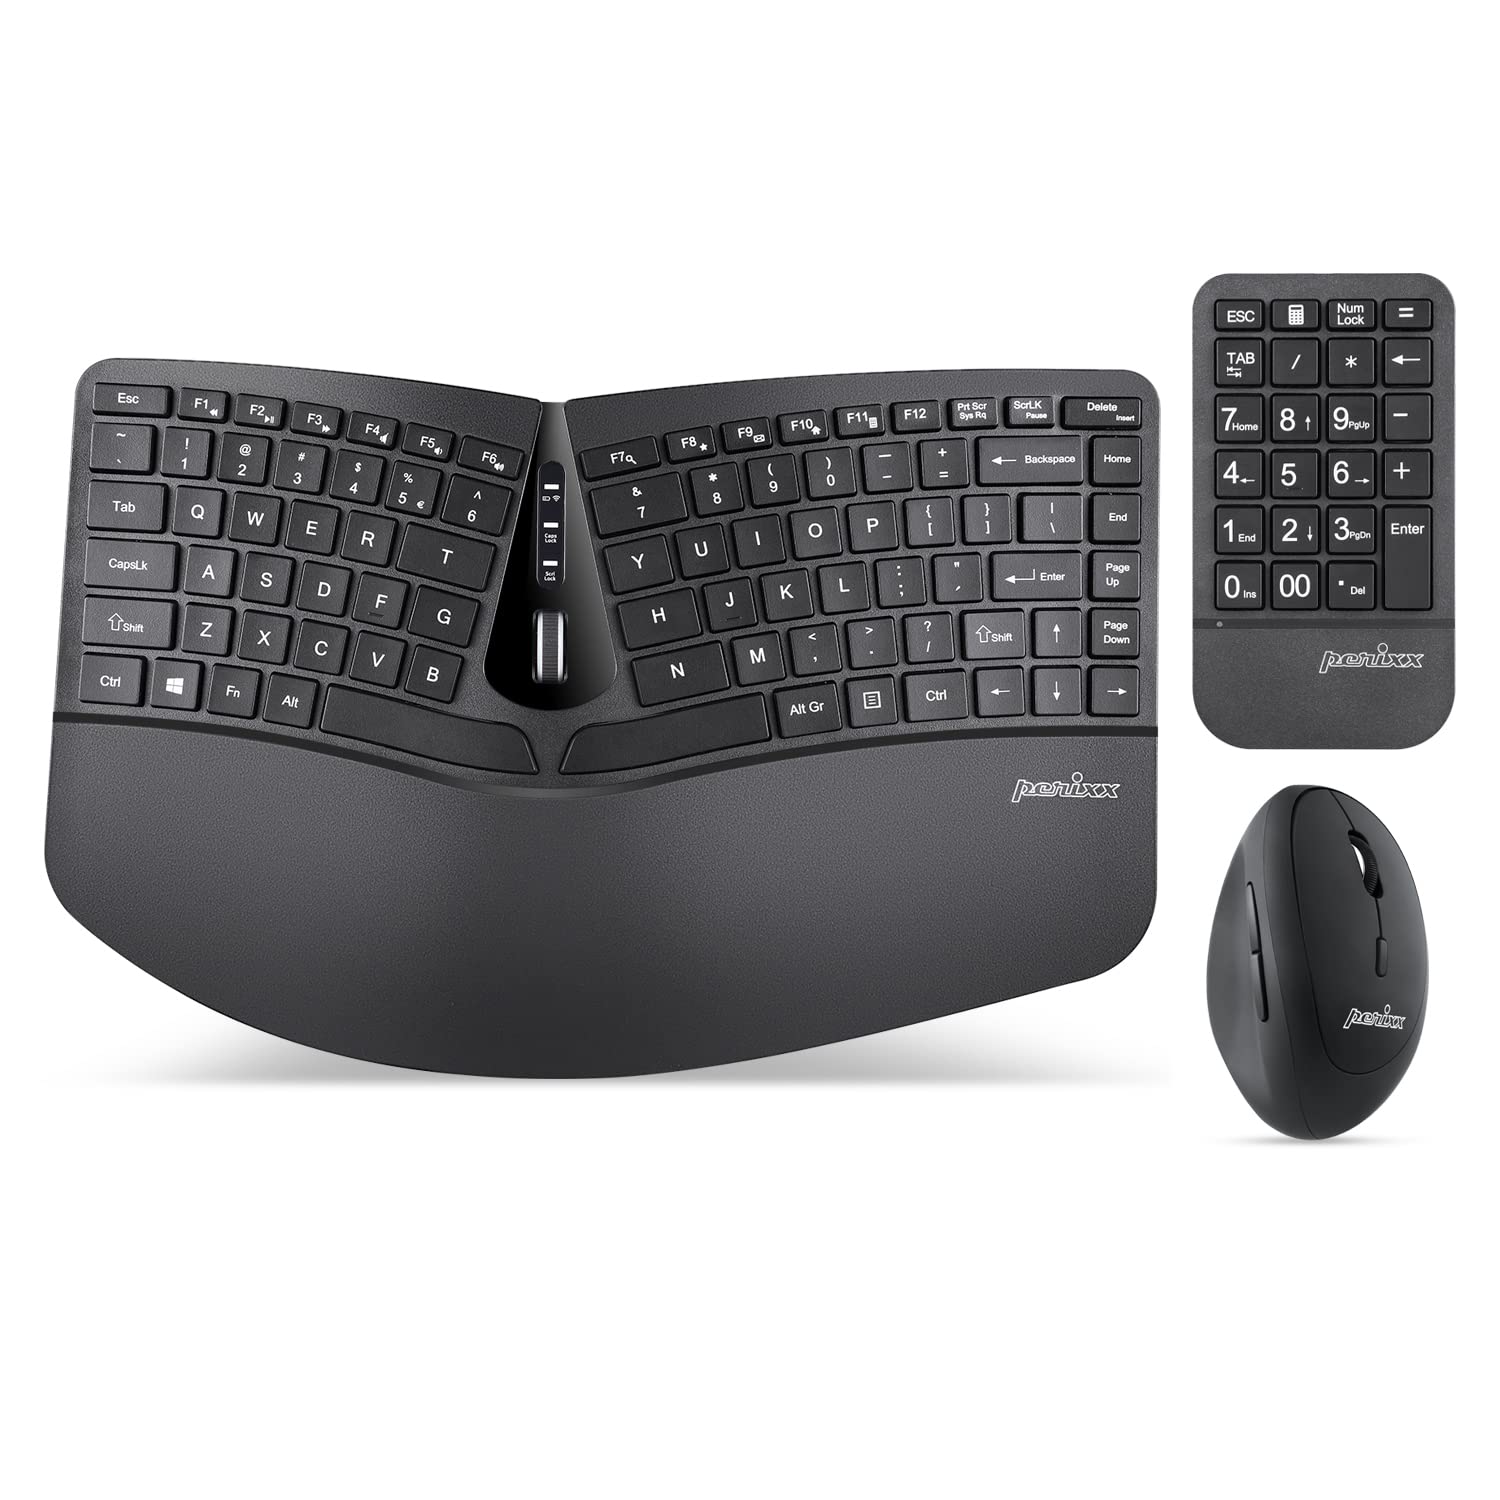 Perixx PERIDUO-606A, 3-in-1 Wireless Compact Ergonomic Keyboard with Vertical Mouse and Numeric Keypad - Adjustable Palm Rest - Tilt Wheel - Membrane Low Profile Keys - US English